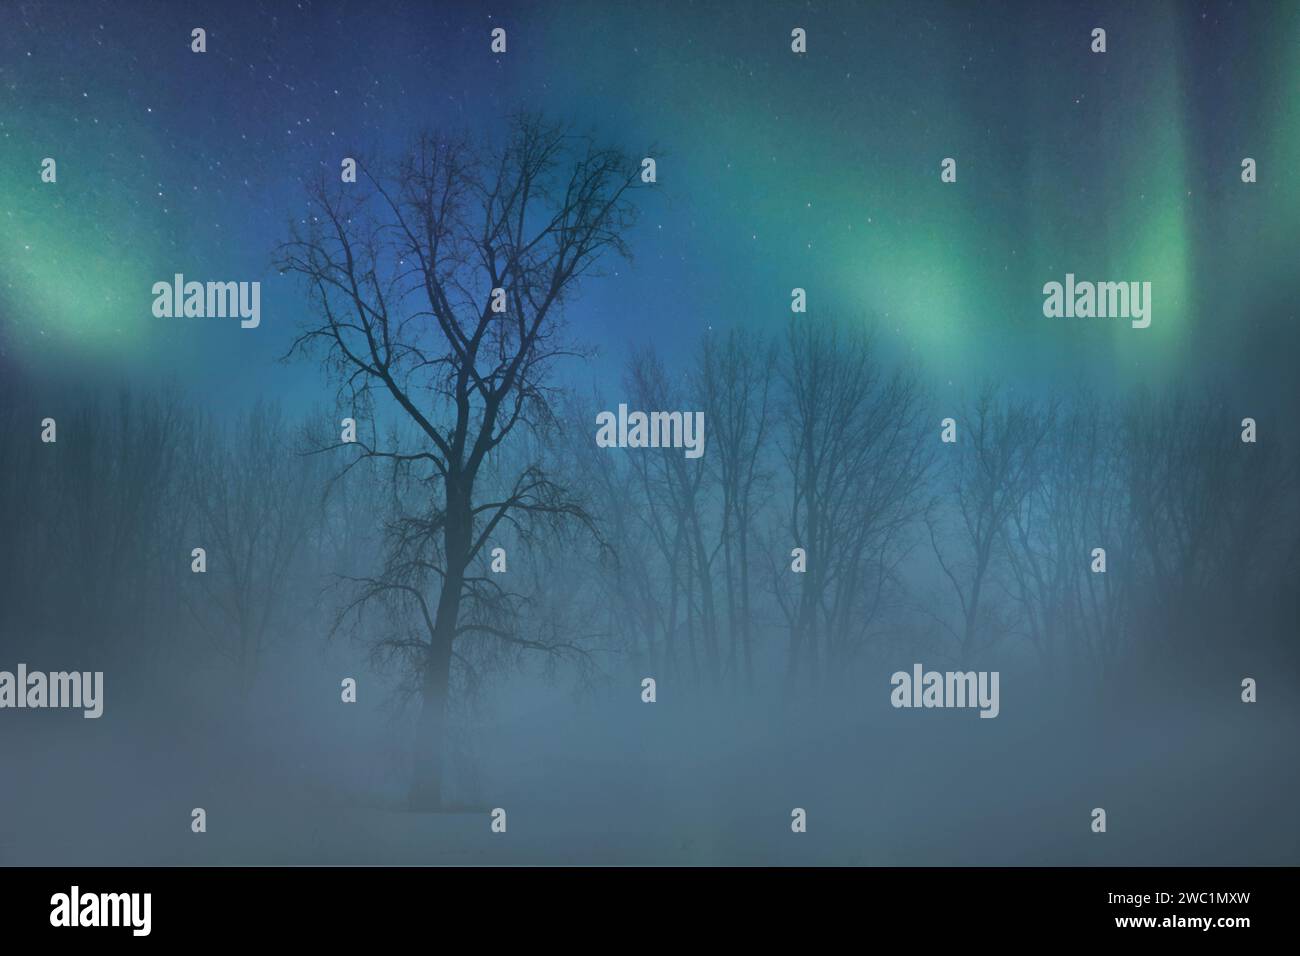 Northern lights over a foggy snow covered field with trees at night Stock Photo